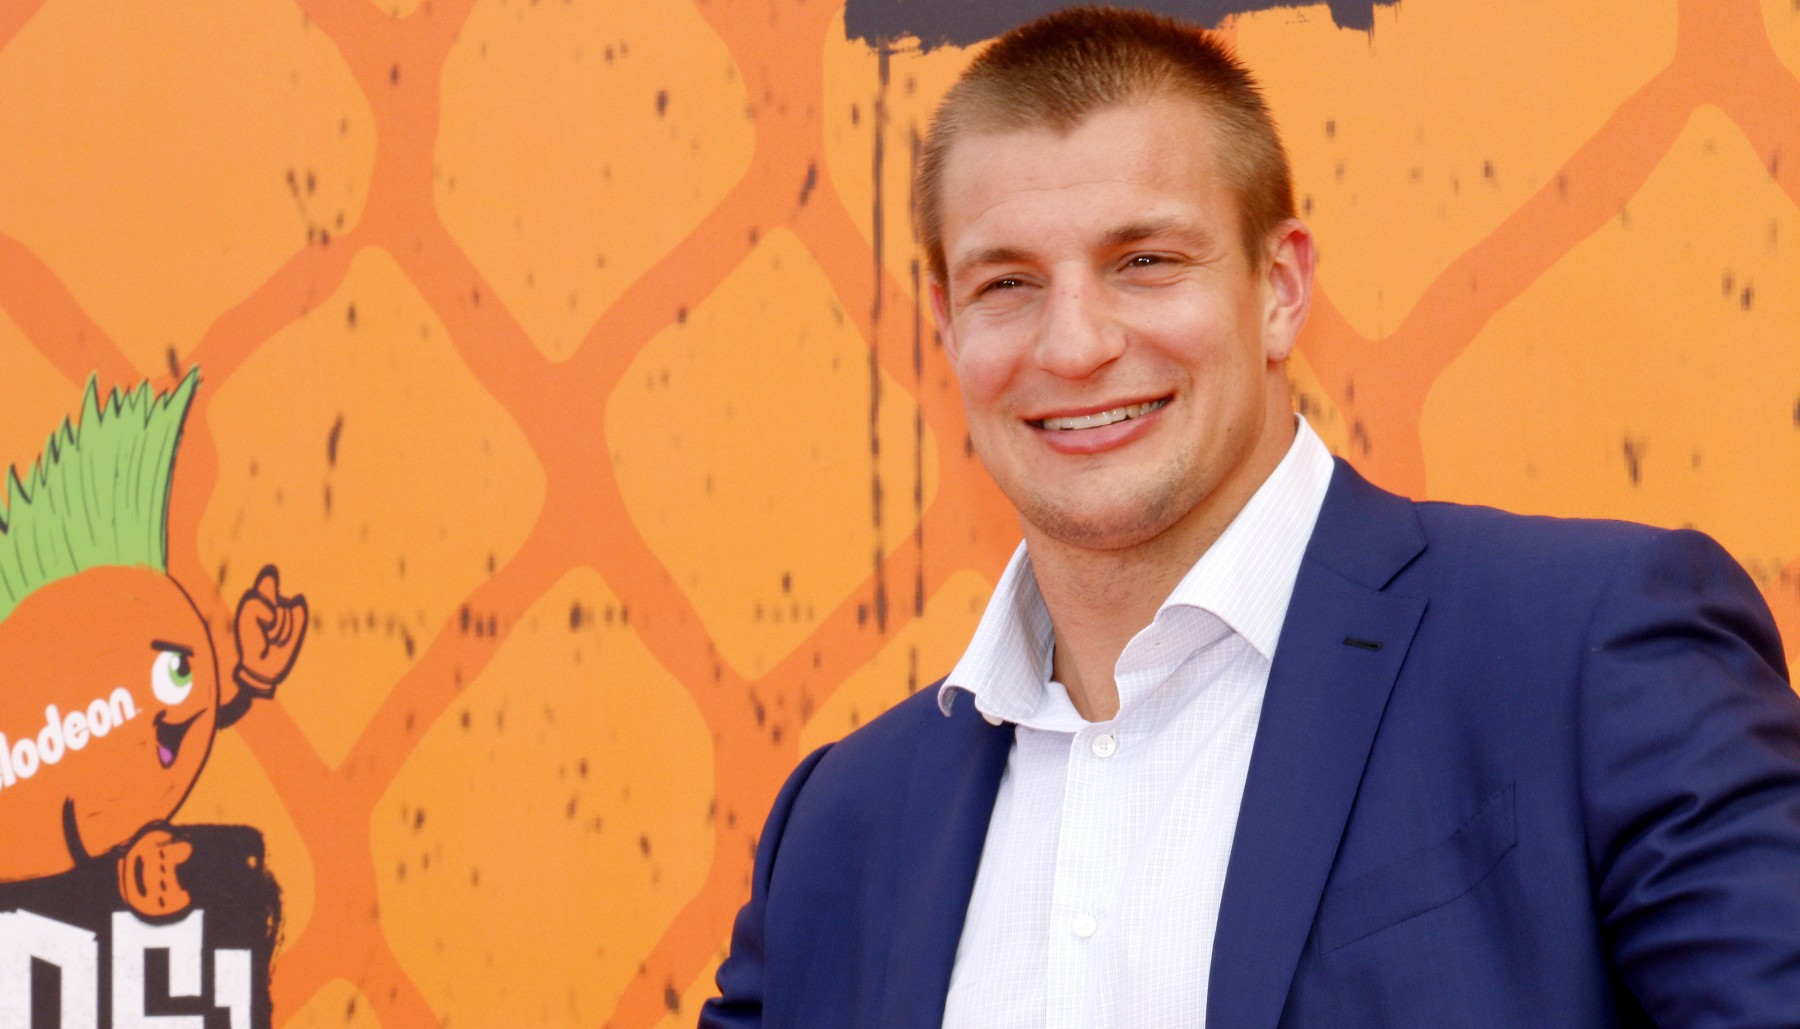 6 Facts About Super Bowl LV Champion Rob Gronkowski